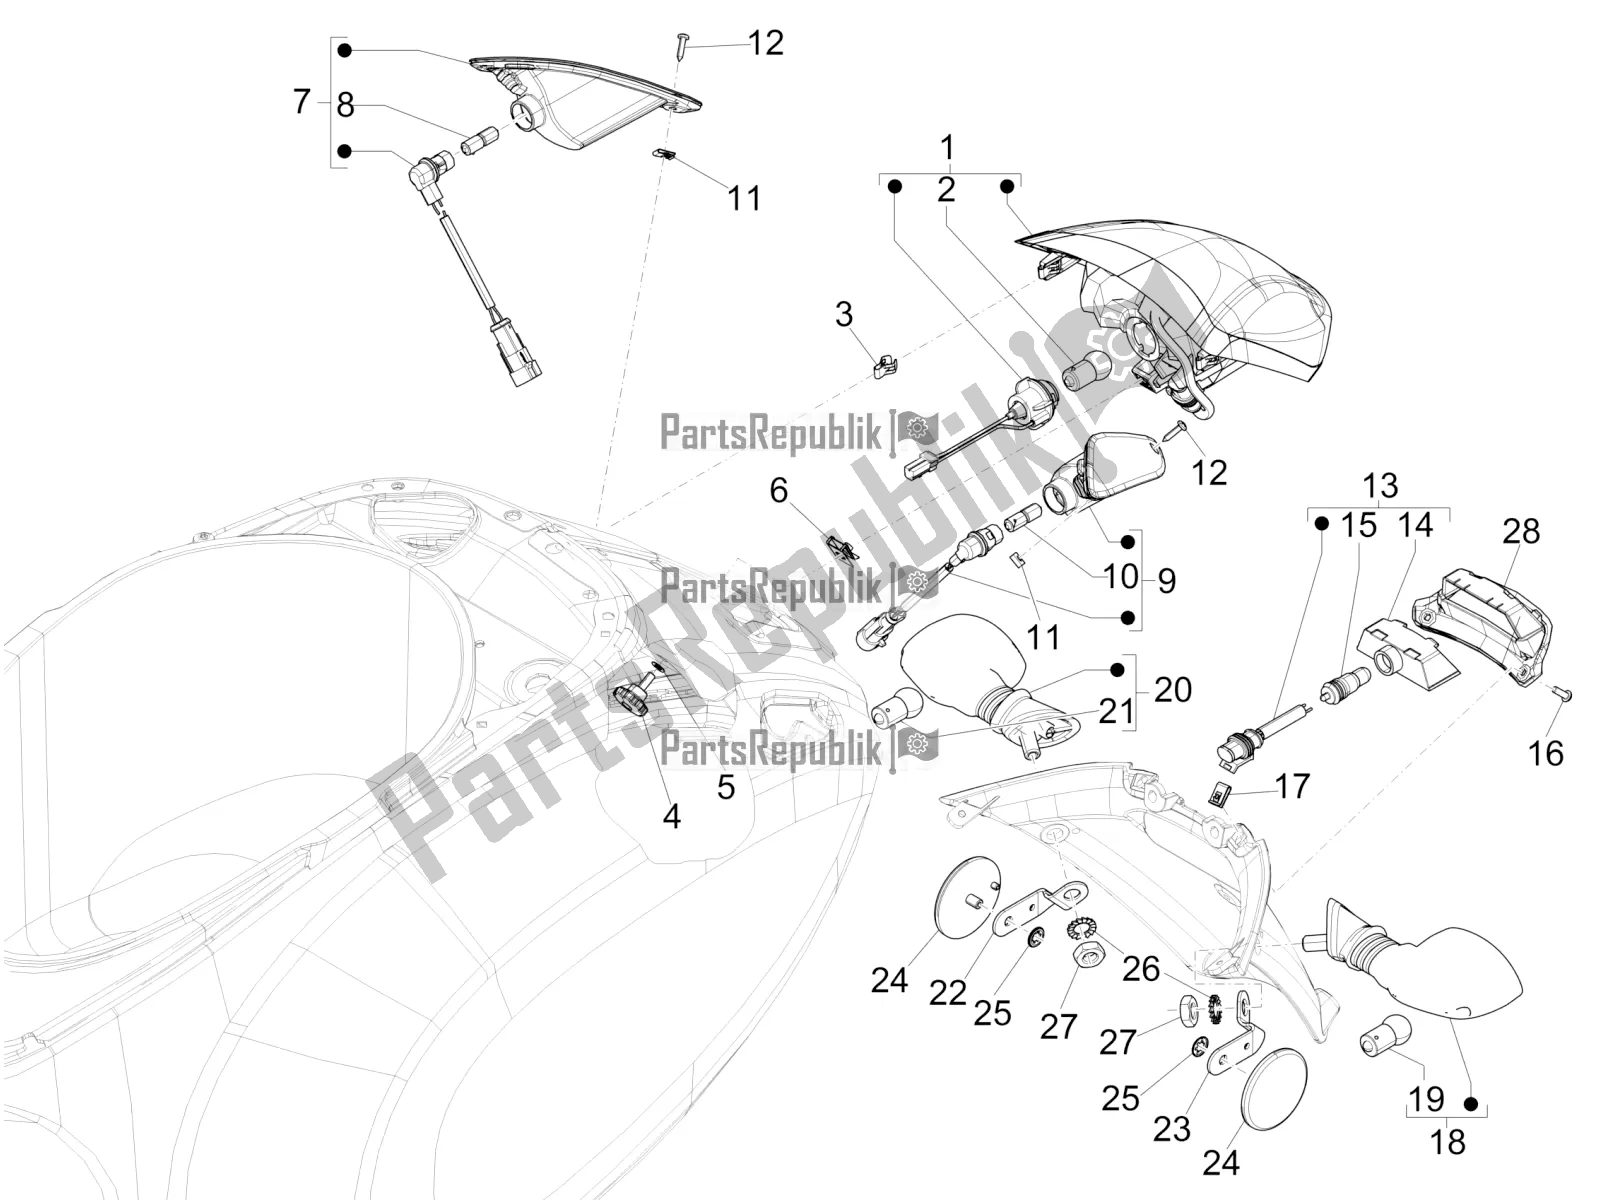 All parts for the Rear Headlamps - Turn Signal Lamps of the Vespa Elettrica Motociclo 70 KM/H USA 2022